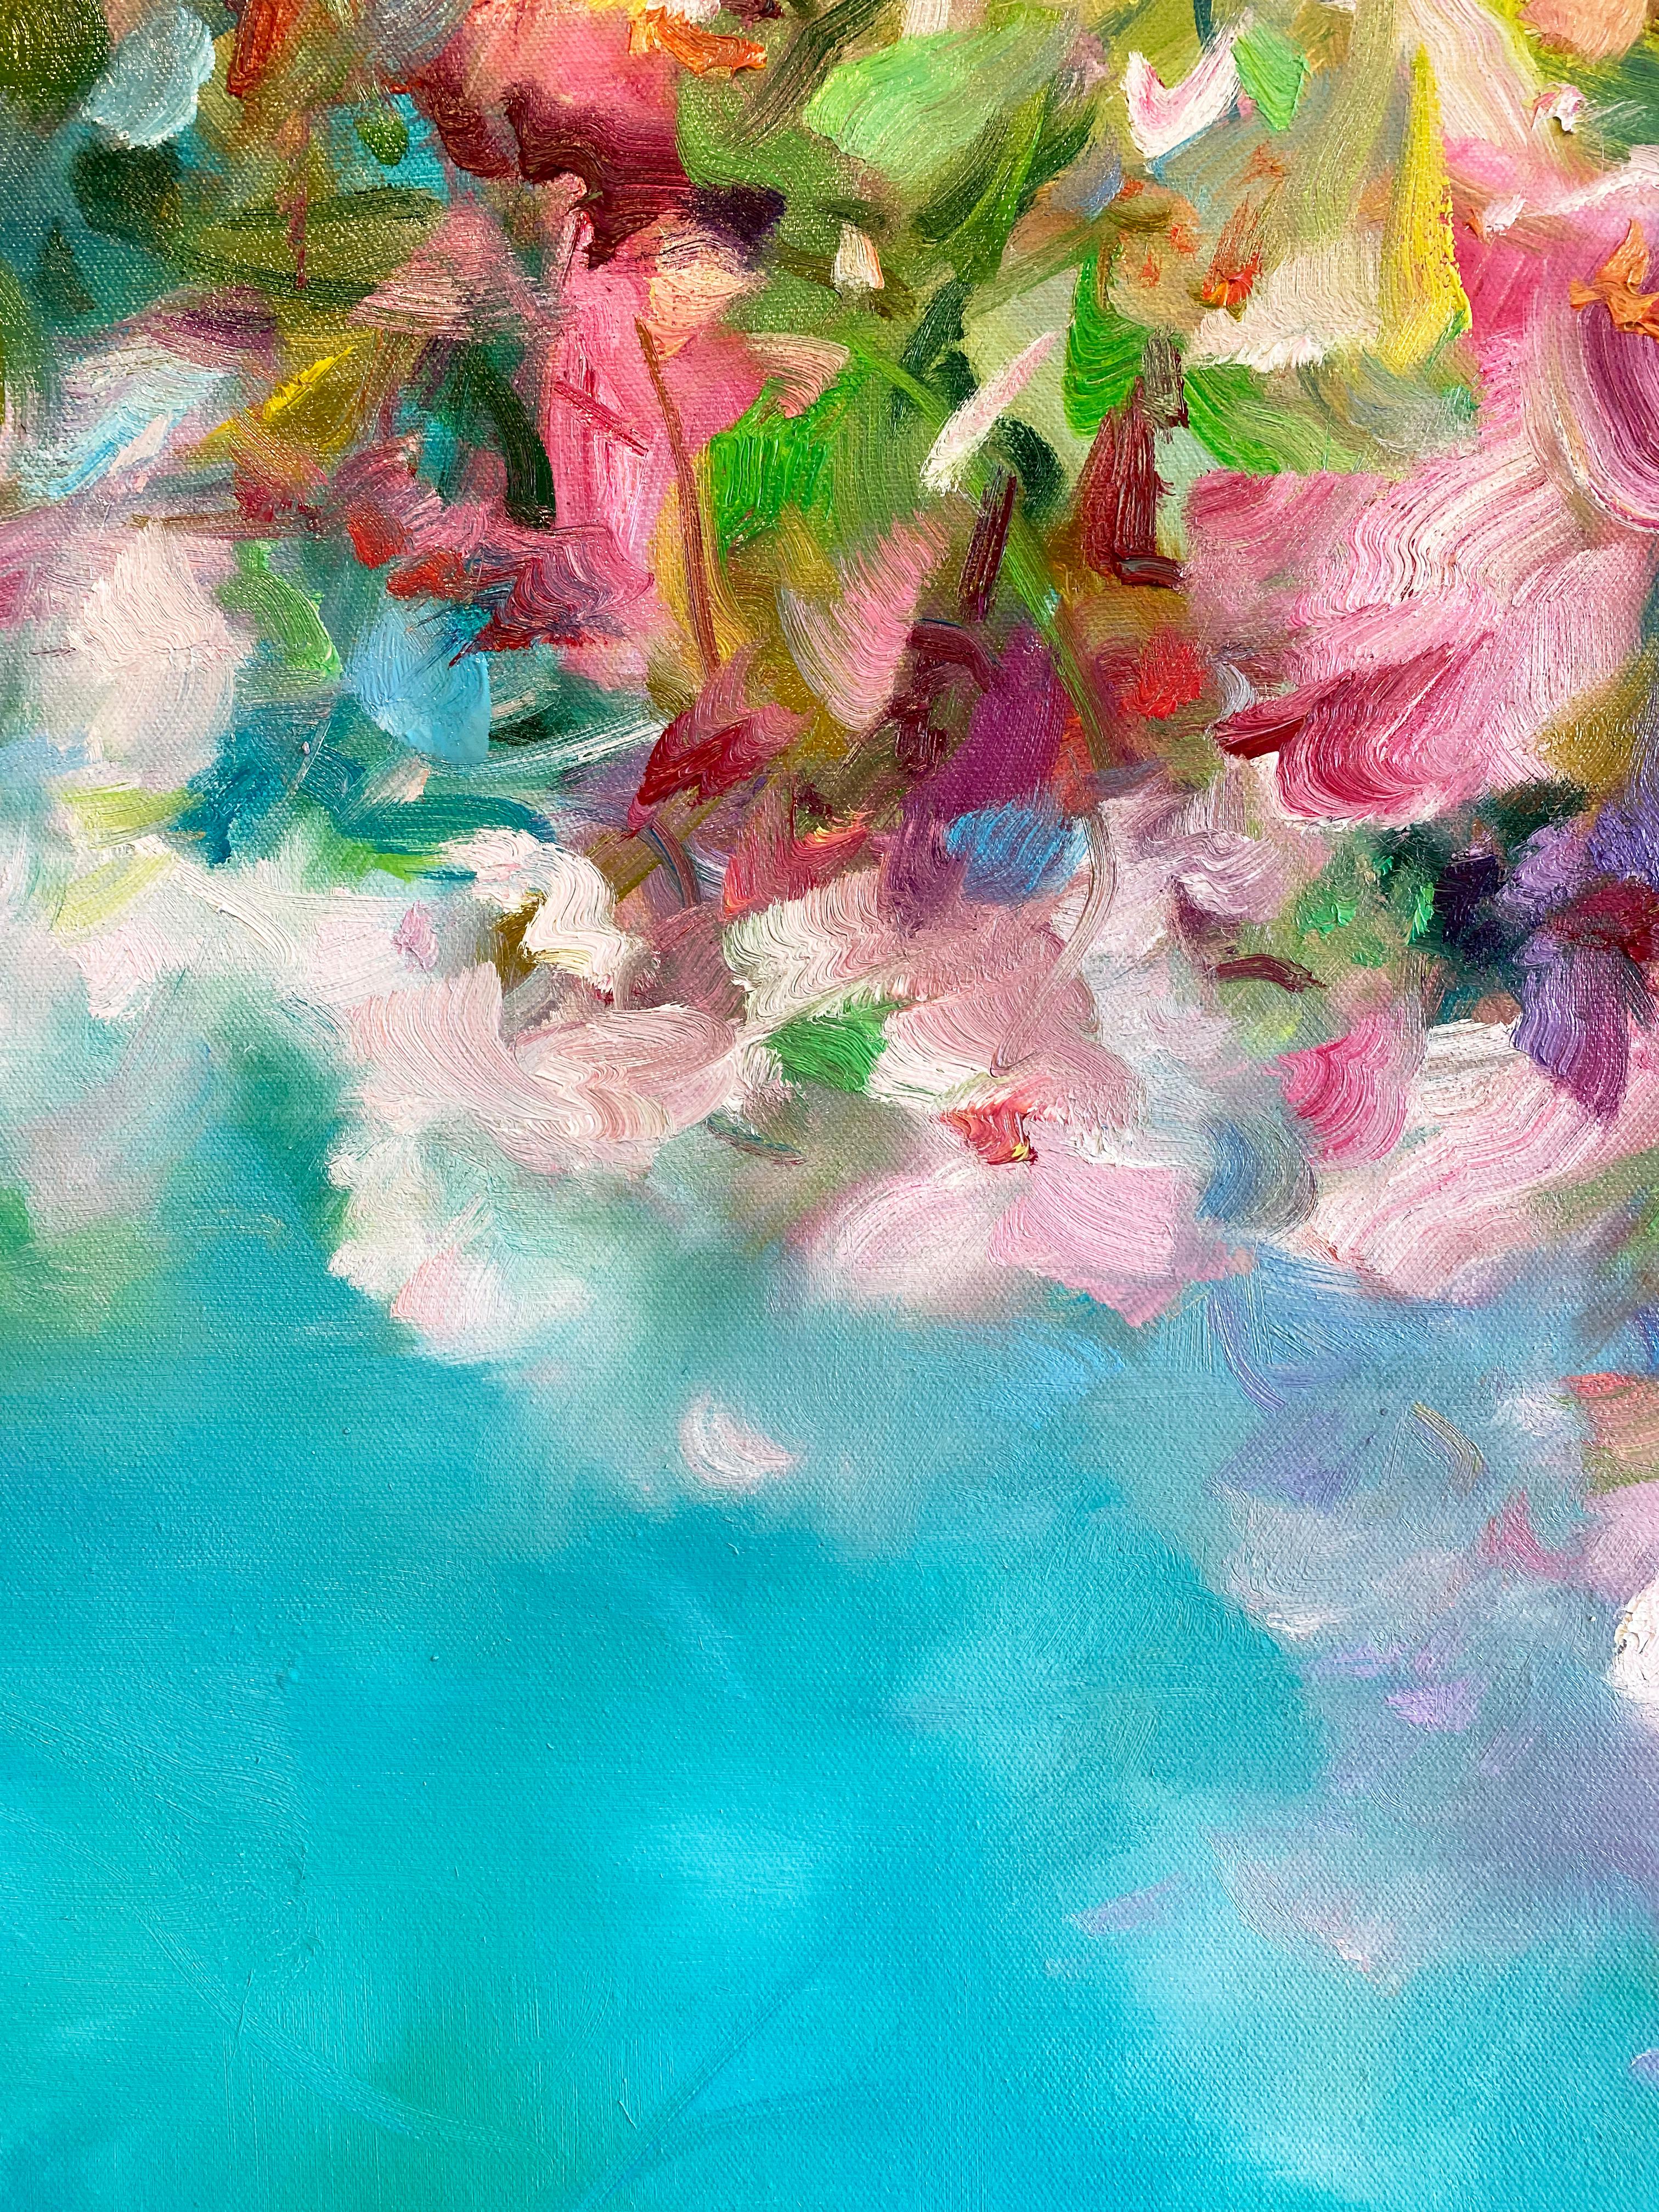 Abstract Expressionist Painting by Yangyang Pan 'Blooming Waterside' 5